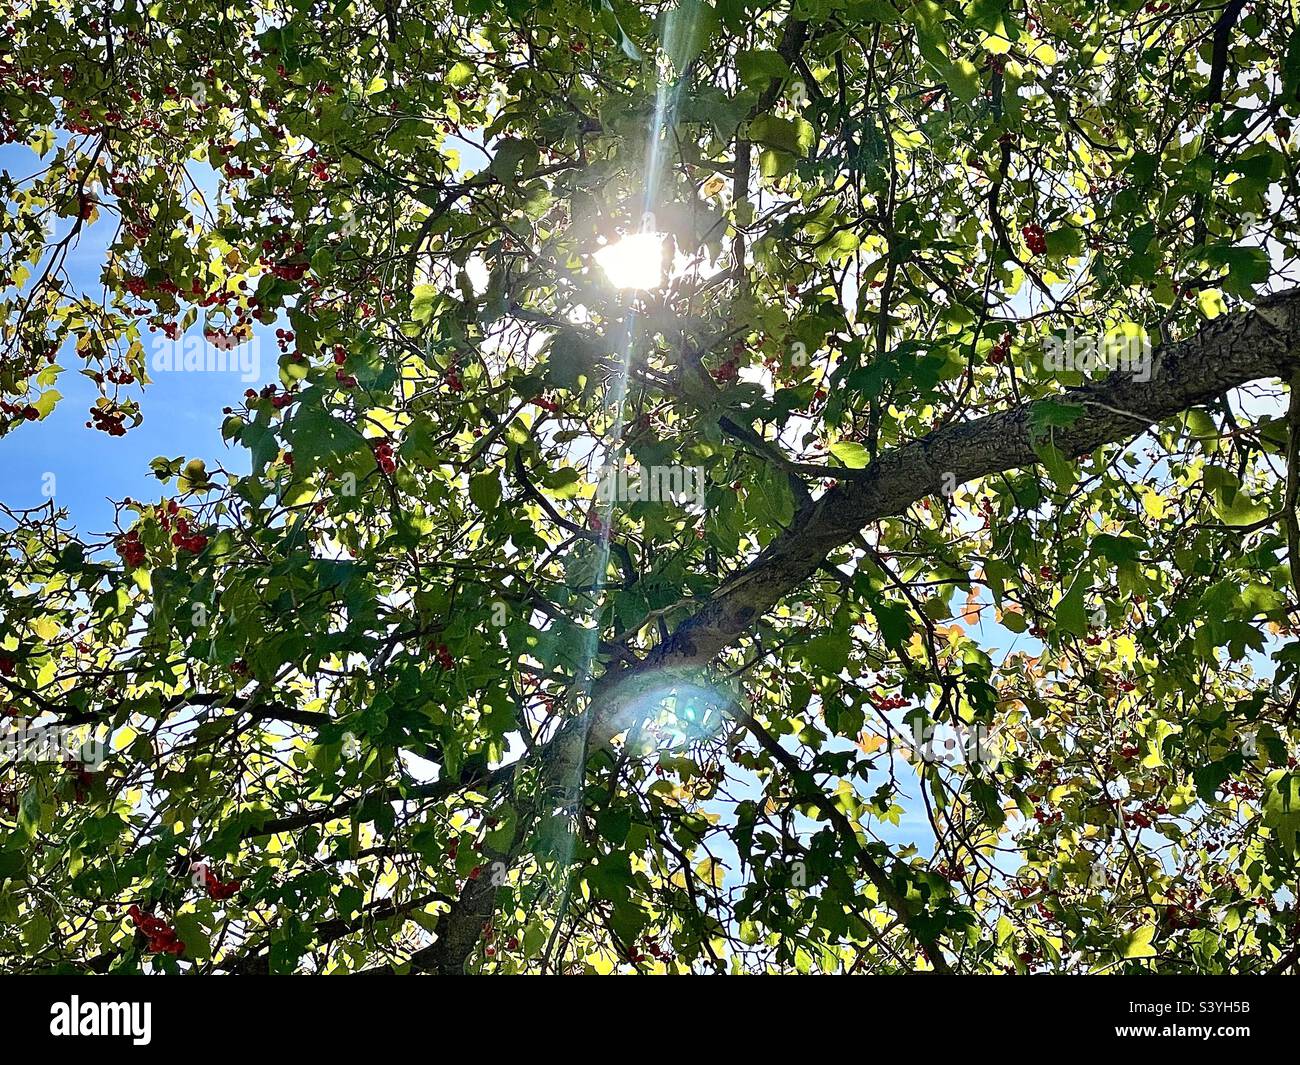 Shooting up from underneath this Hawthorn tree around midday during the fall season in Utah, USA. The sun shines down through the tree branches, leaves and berries as the tree itself rises upward. Stock Photo